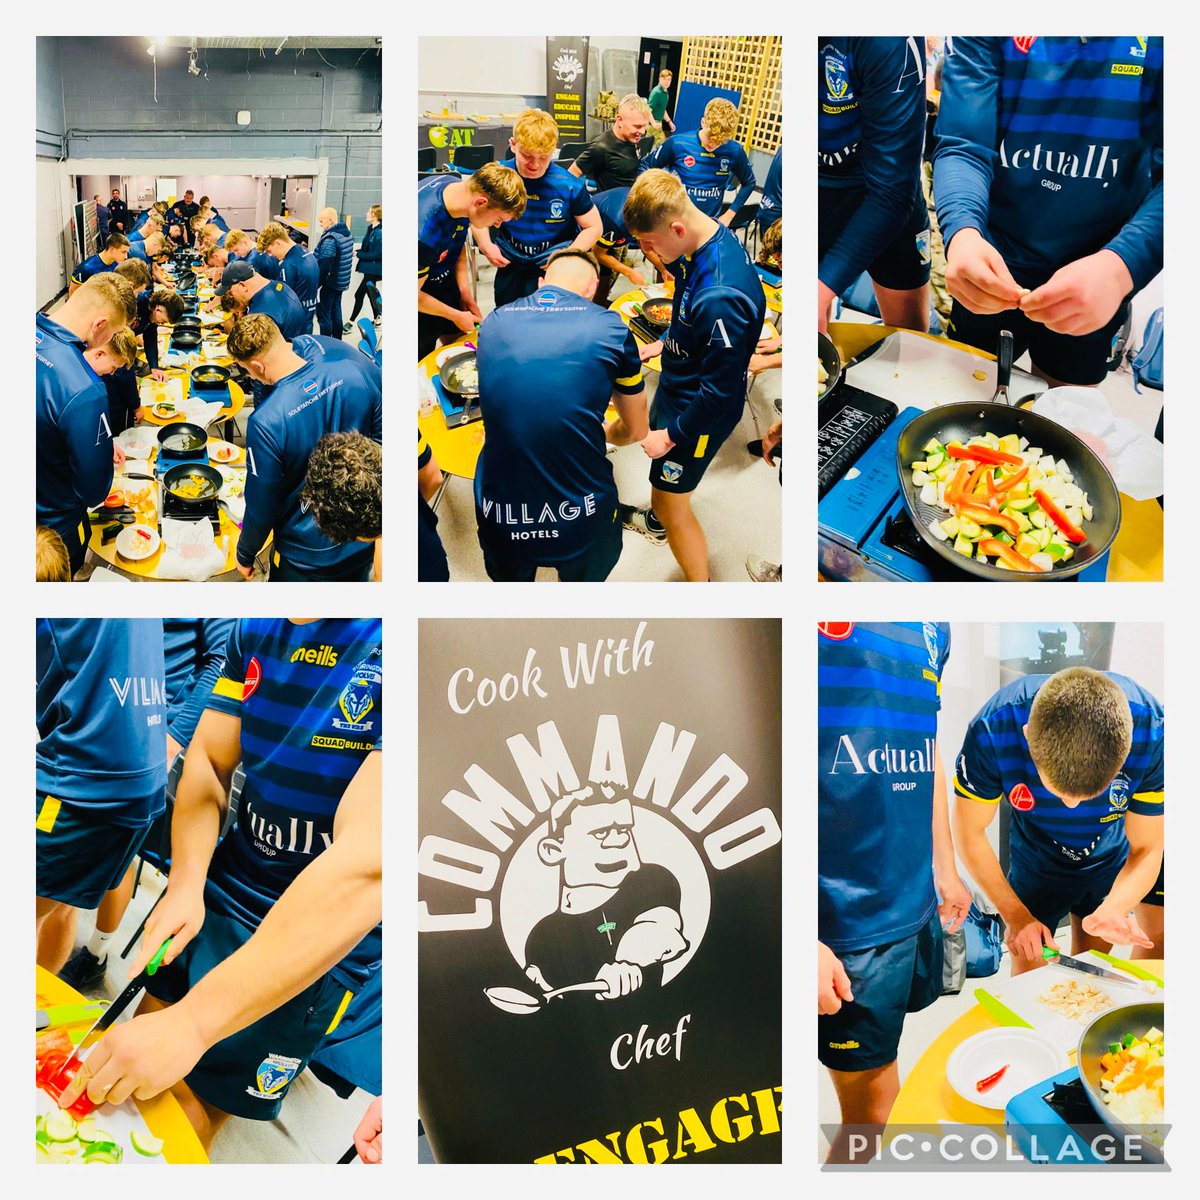 Great session for our @WarringtonRLFC academy squad this evening with @CommandoChef @CdrFCampbell down at our padgate base. An invaluable experience for the lads moving forward. #food #Health #attentiontodetail